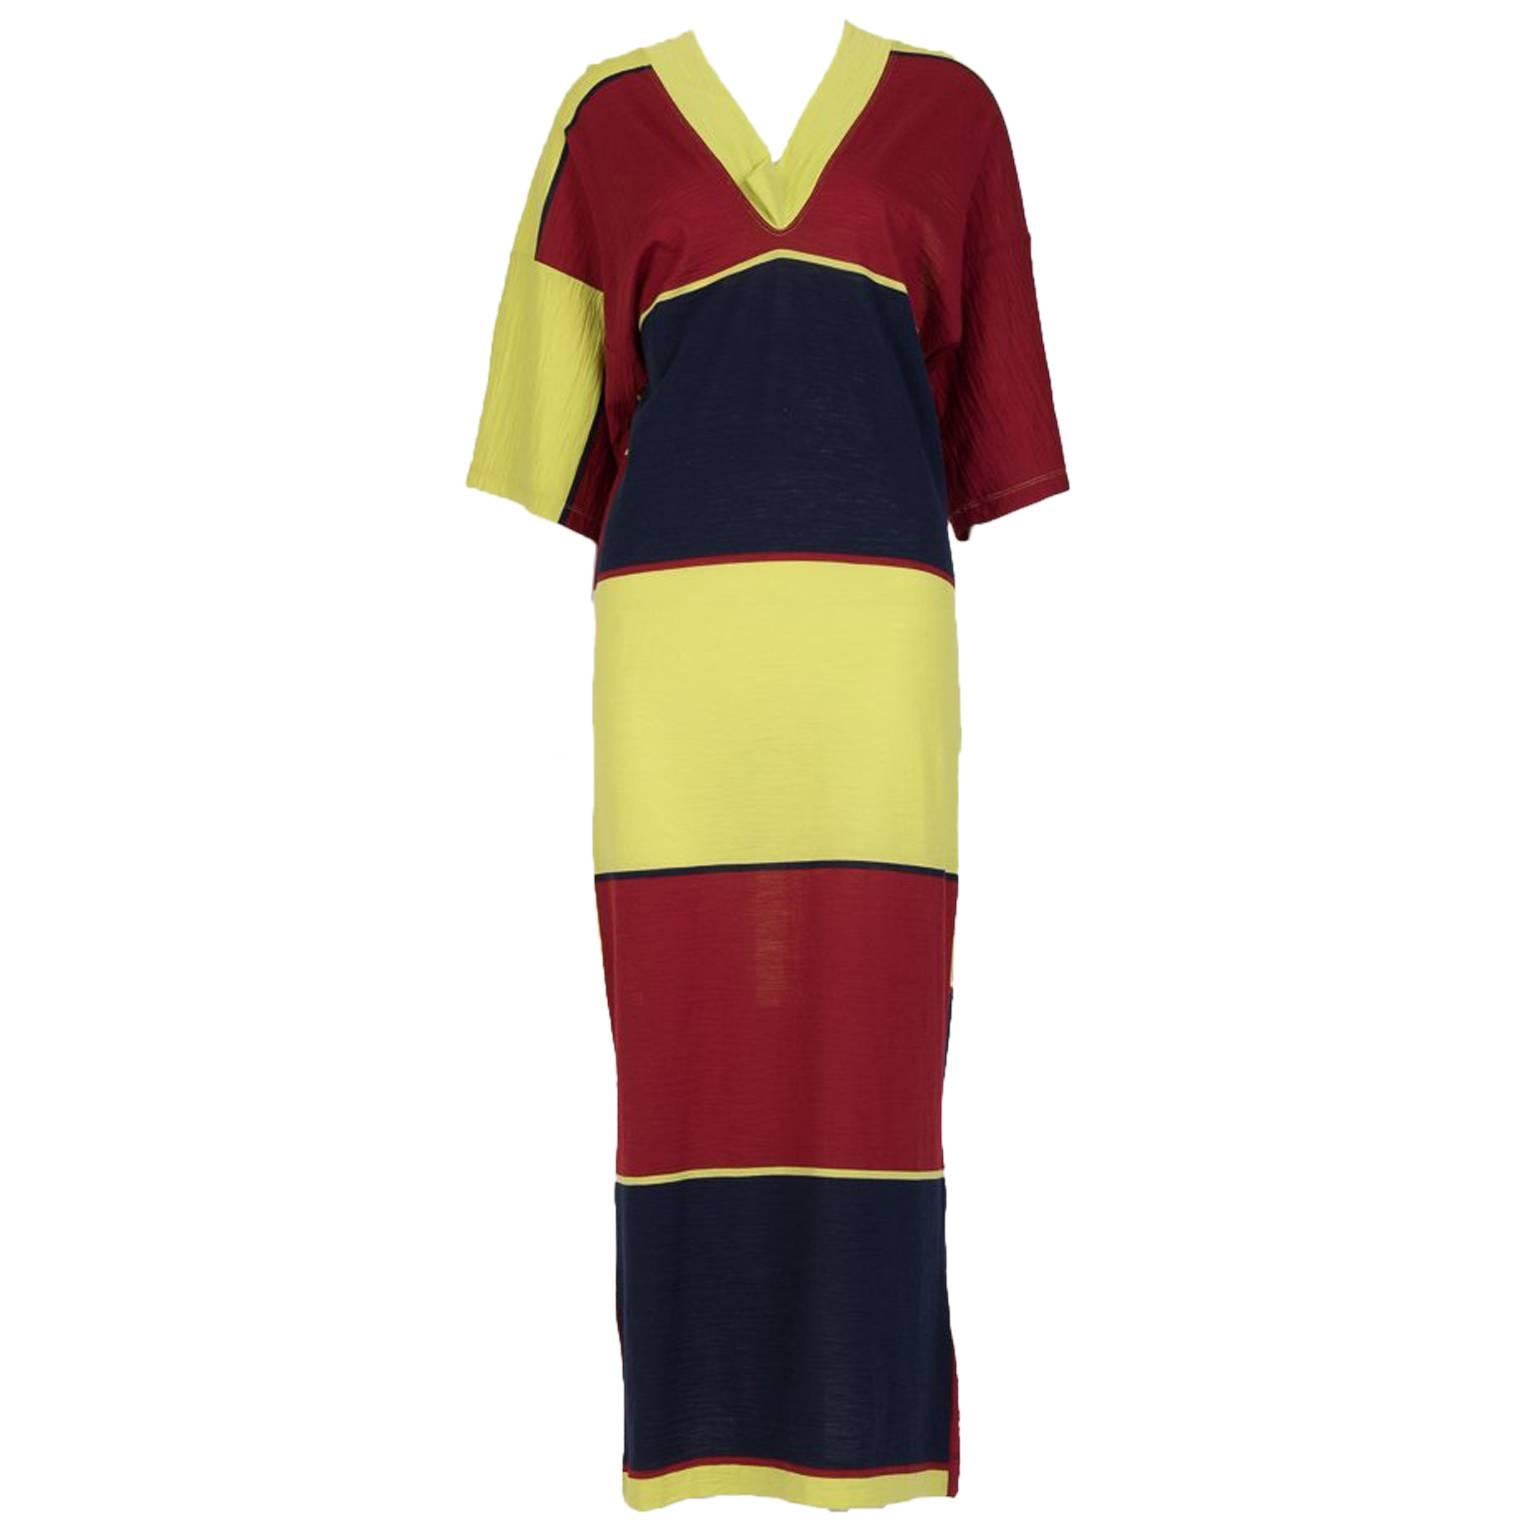 Vivienne Westwood Anglomania Wool Knit Dress For Sale